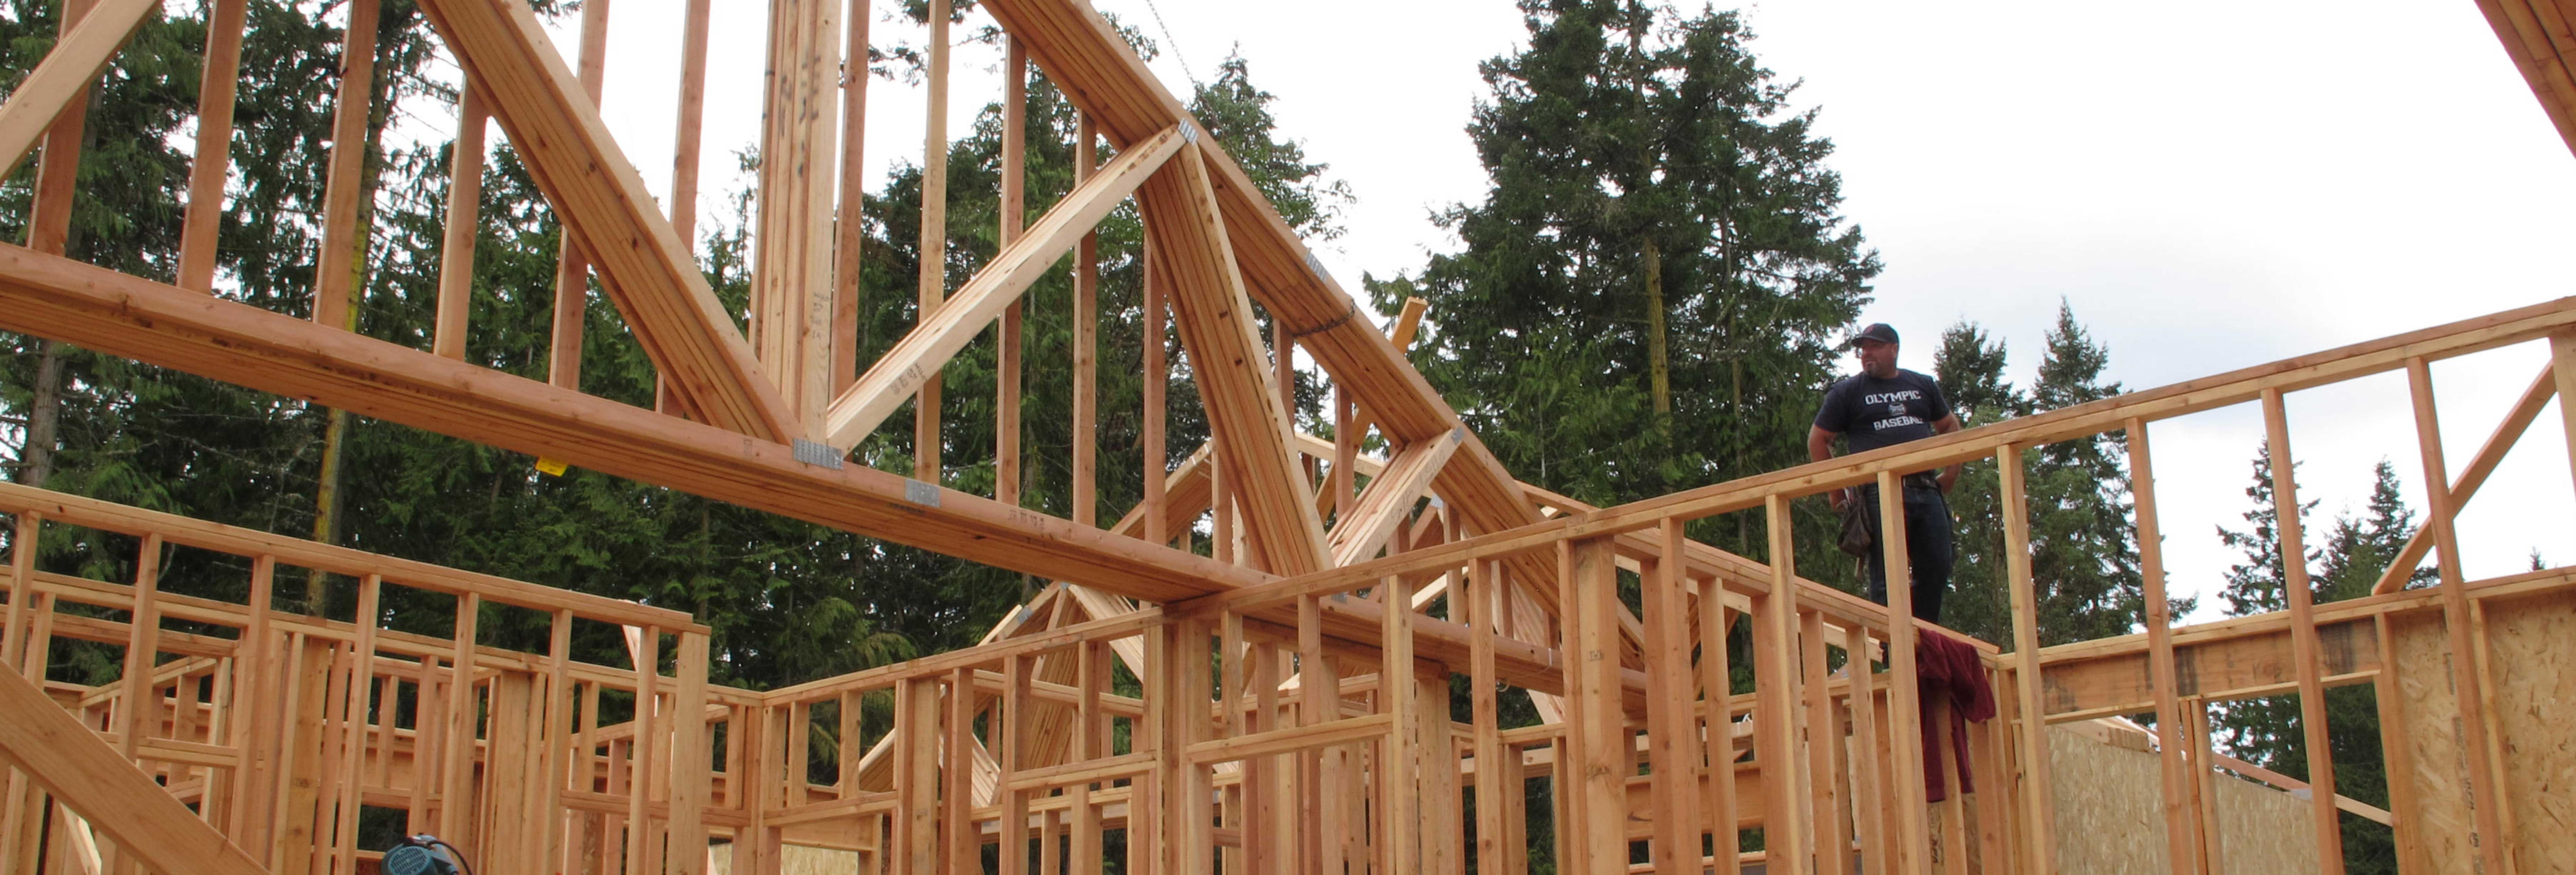 Custom Homes - Carpenter guiding roof truss from crane to wall frame on house under construction